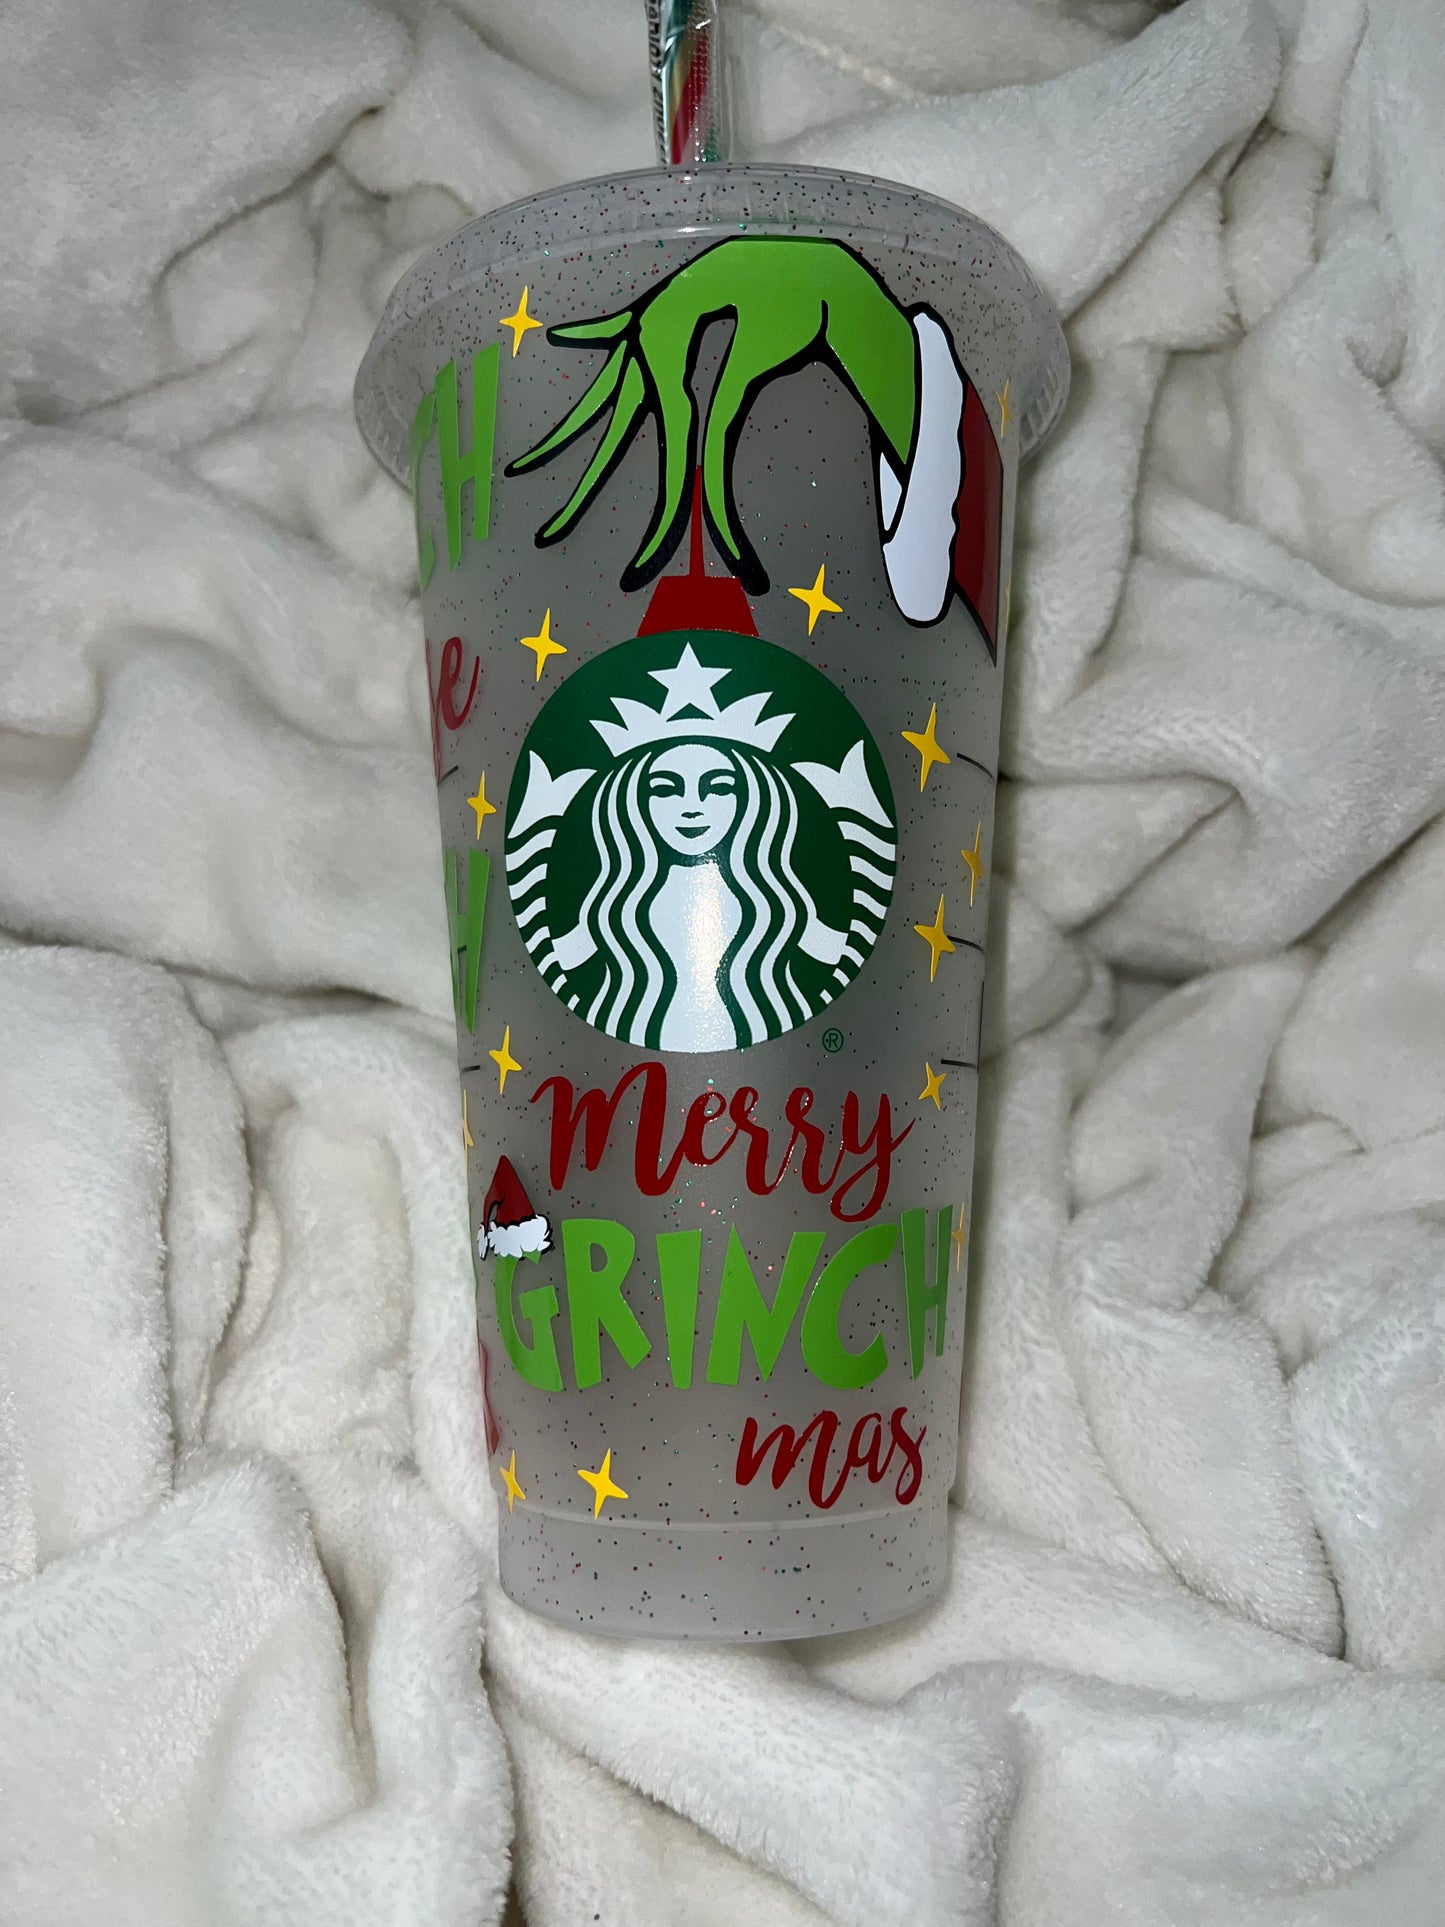 The Grinch Typography Sbx cup